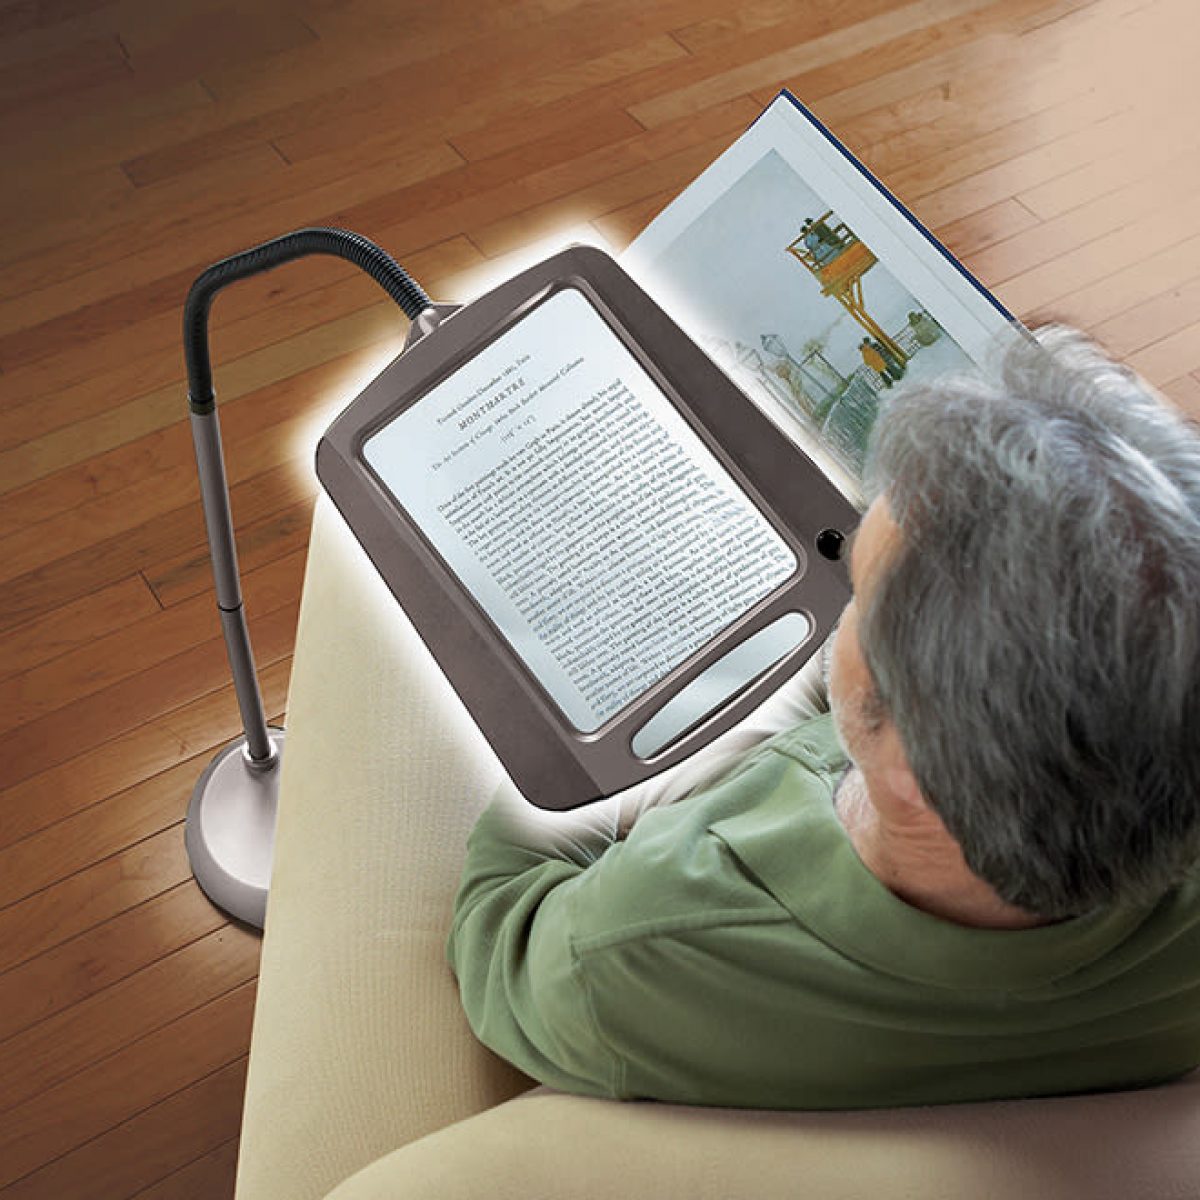 Buy Full Page 8 x 10 Inch Magnifier LED Illuminated Floor Lamp, Silver  402039-BRNZ Bronze Color